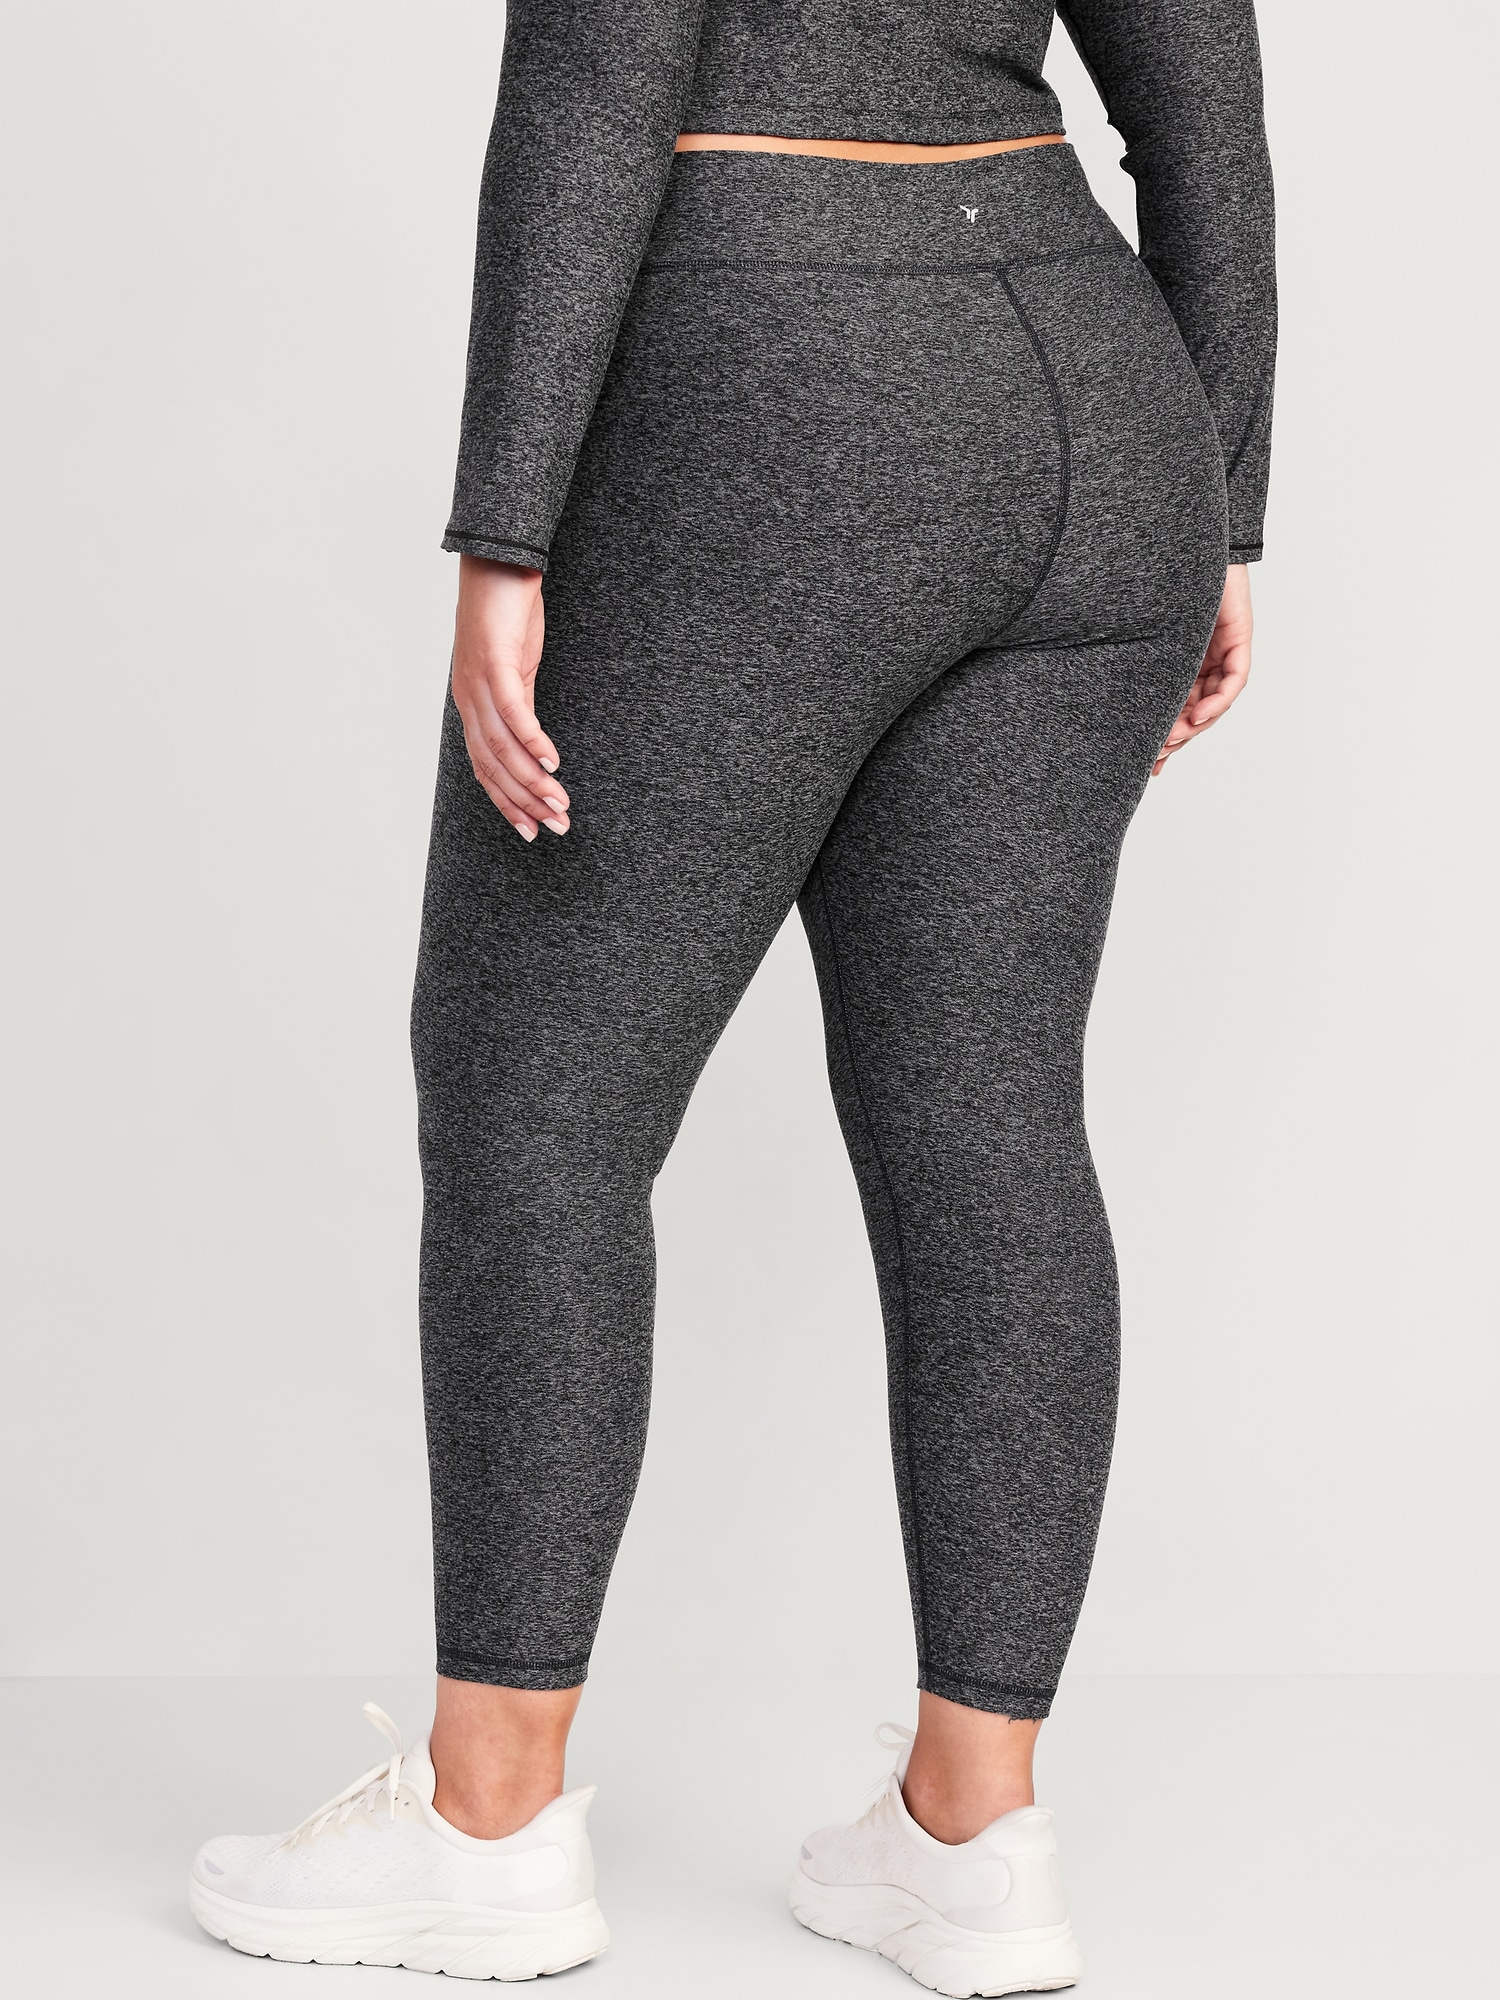 High-Rise Plus-Size 7/8-Length Mesh-Trim Compression Leggings, Old Navy